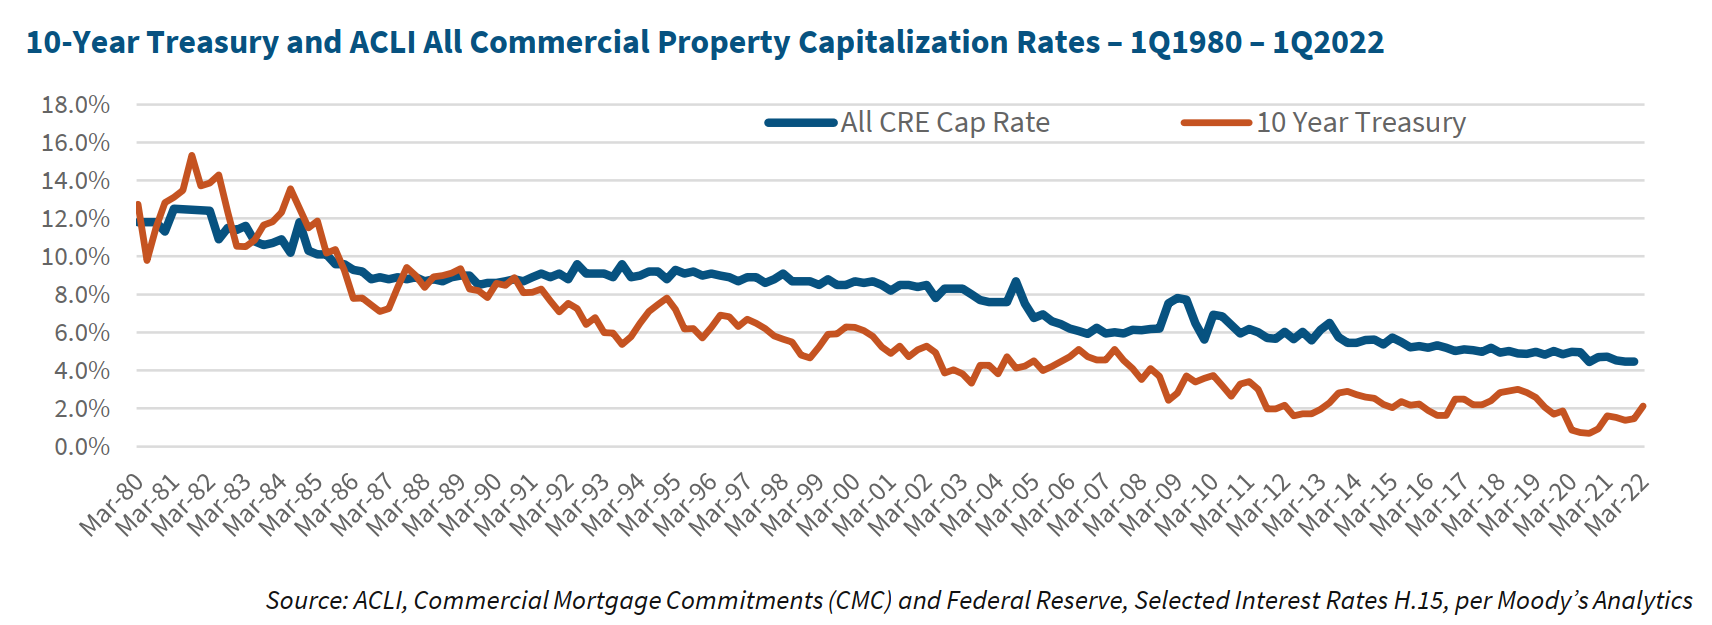 10-Year Treasury and ACLI All Commercial Property Capitalization Rates – 1Q1980 – 1Q2022